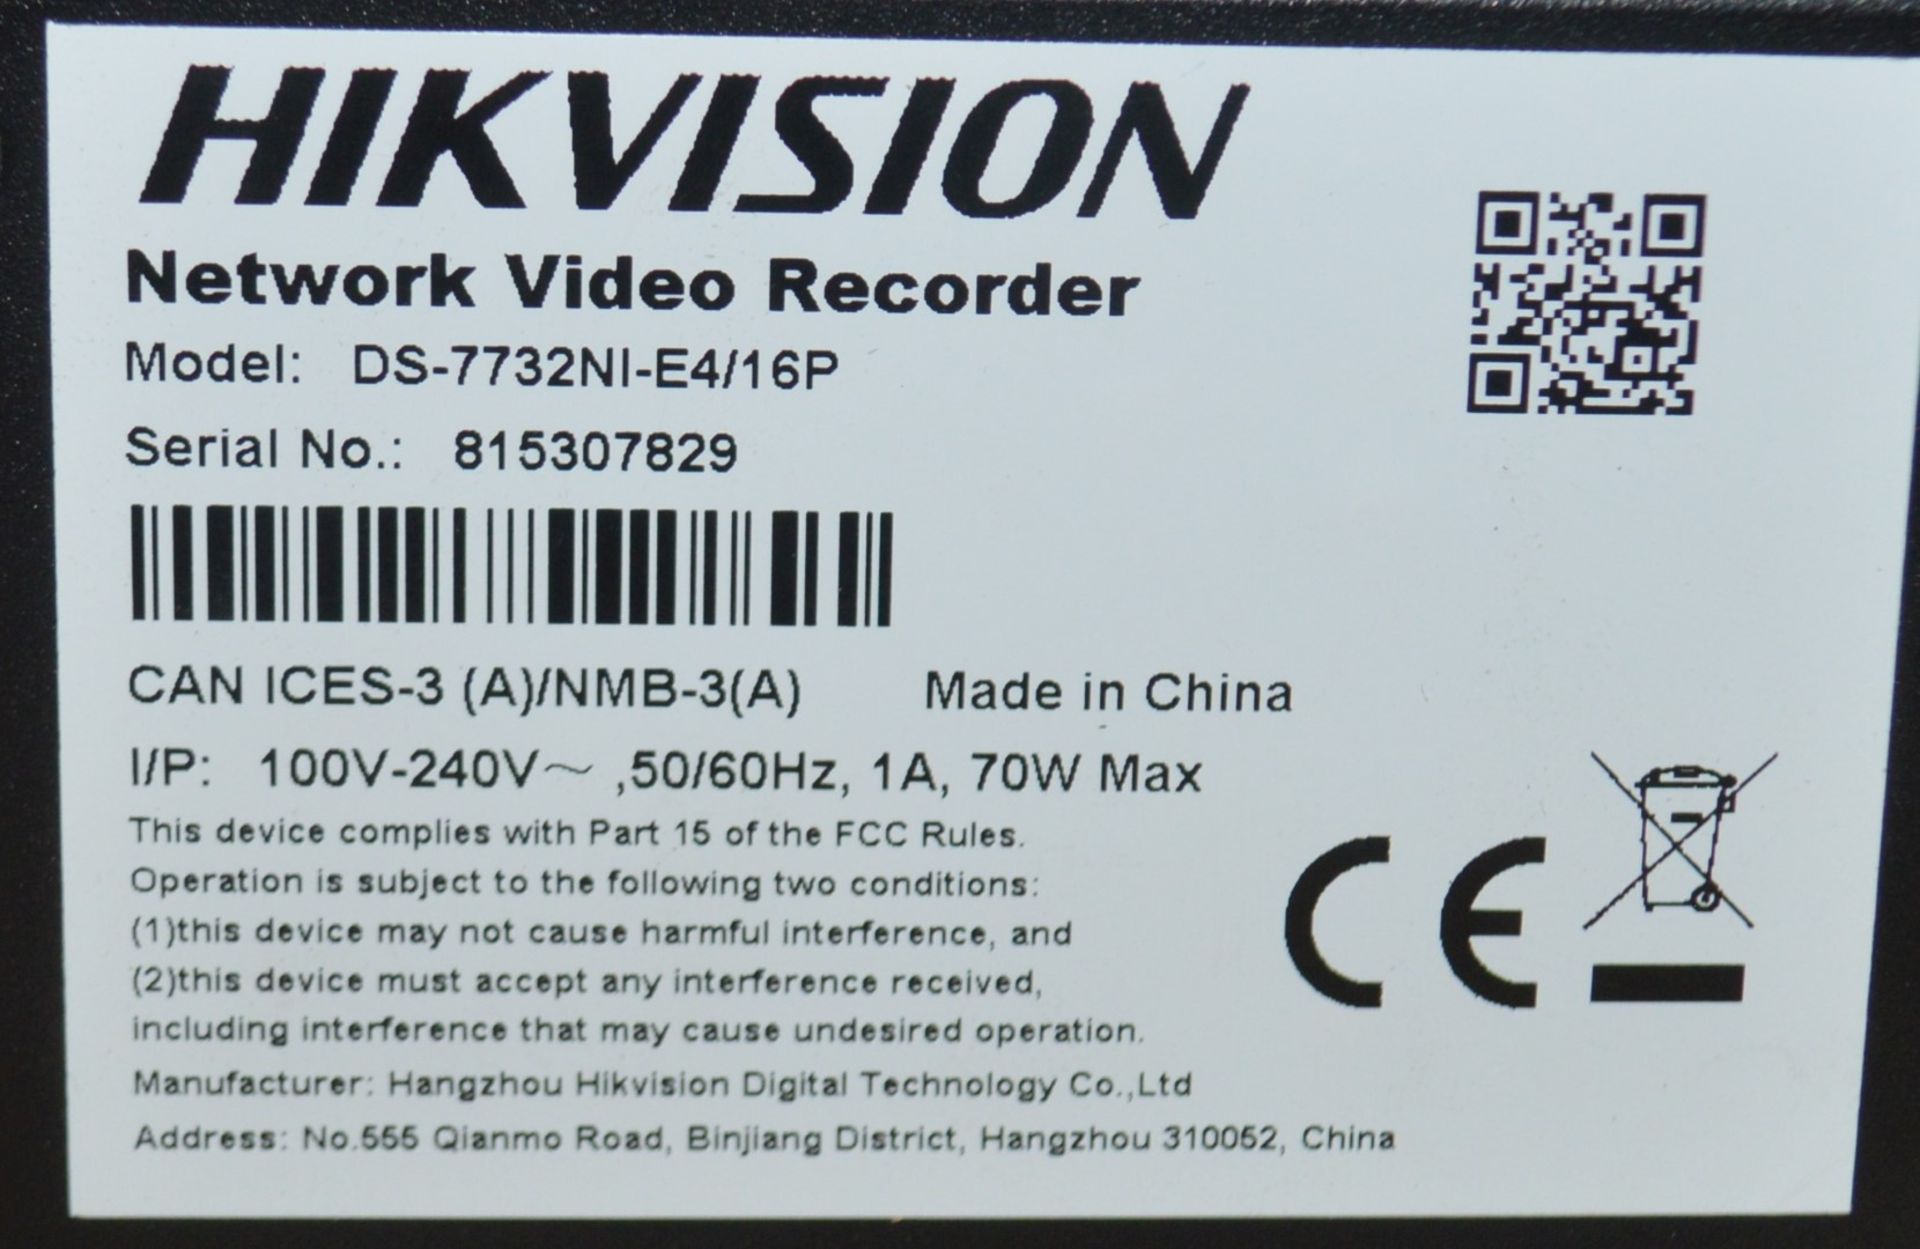 1 x Hikvision Ds-7732NI-E4/16P Network Video Recorder With 32 Channels - RRP £499 - Includes Power - Image 5 of 5